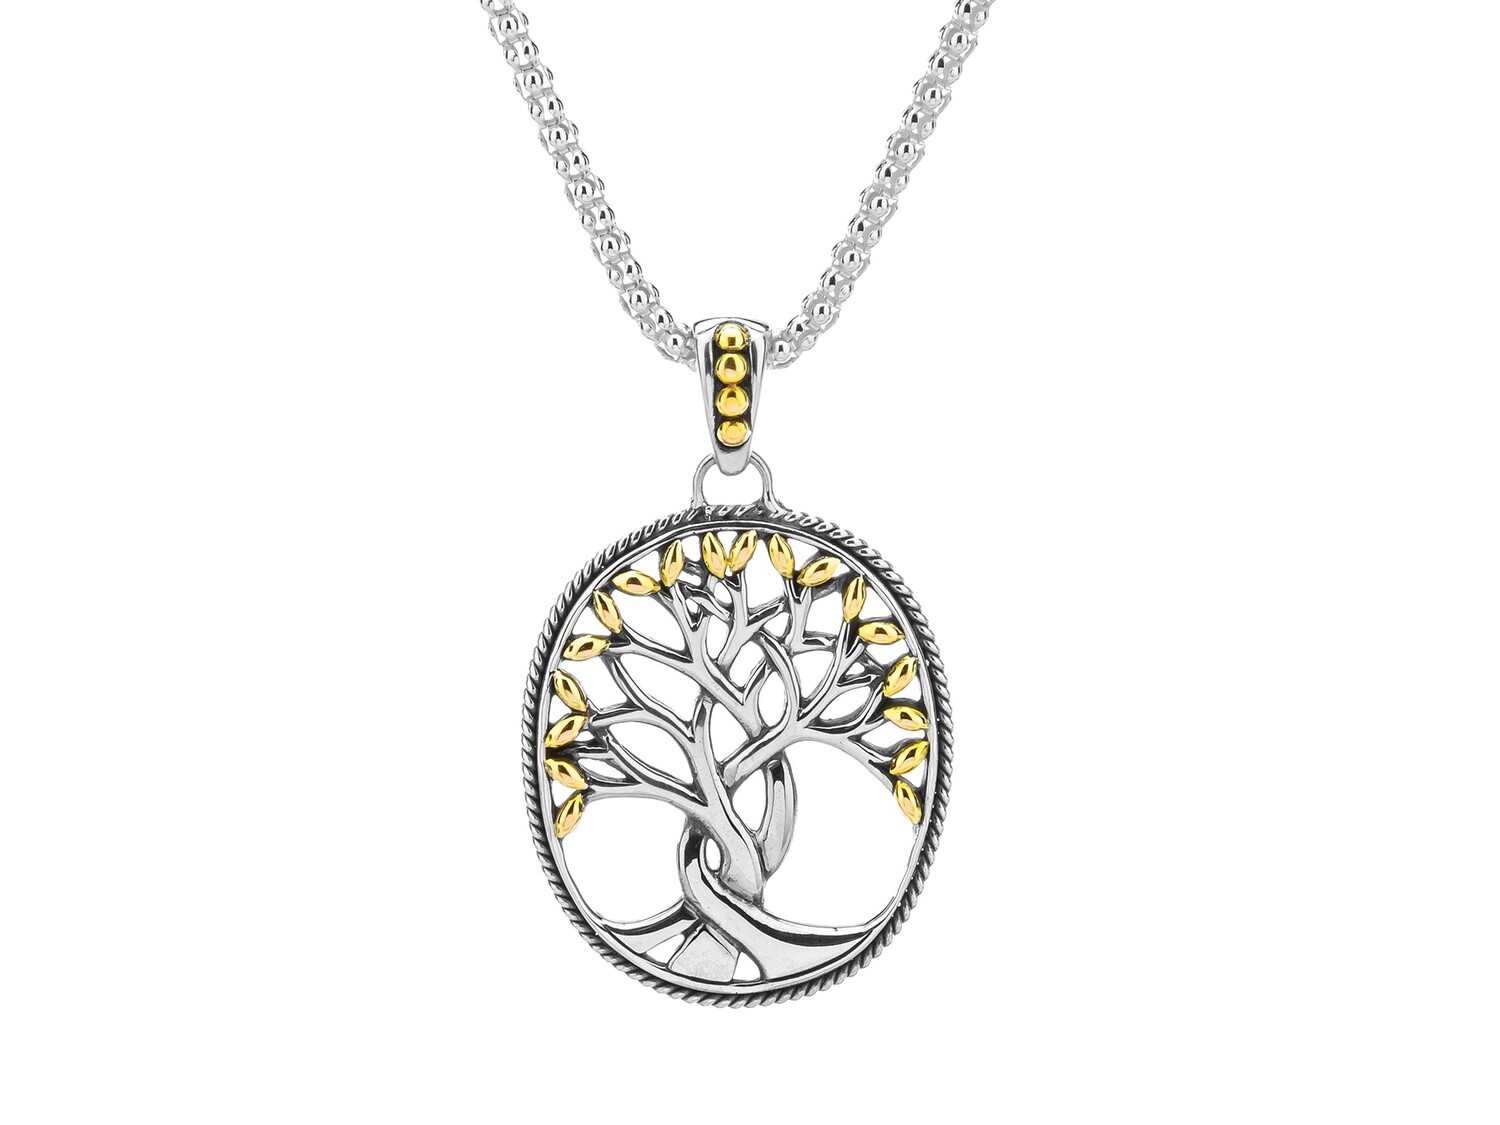 STERLING SILVER 18K GOLD TREE OF LIFE PENDANT